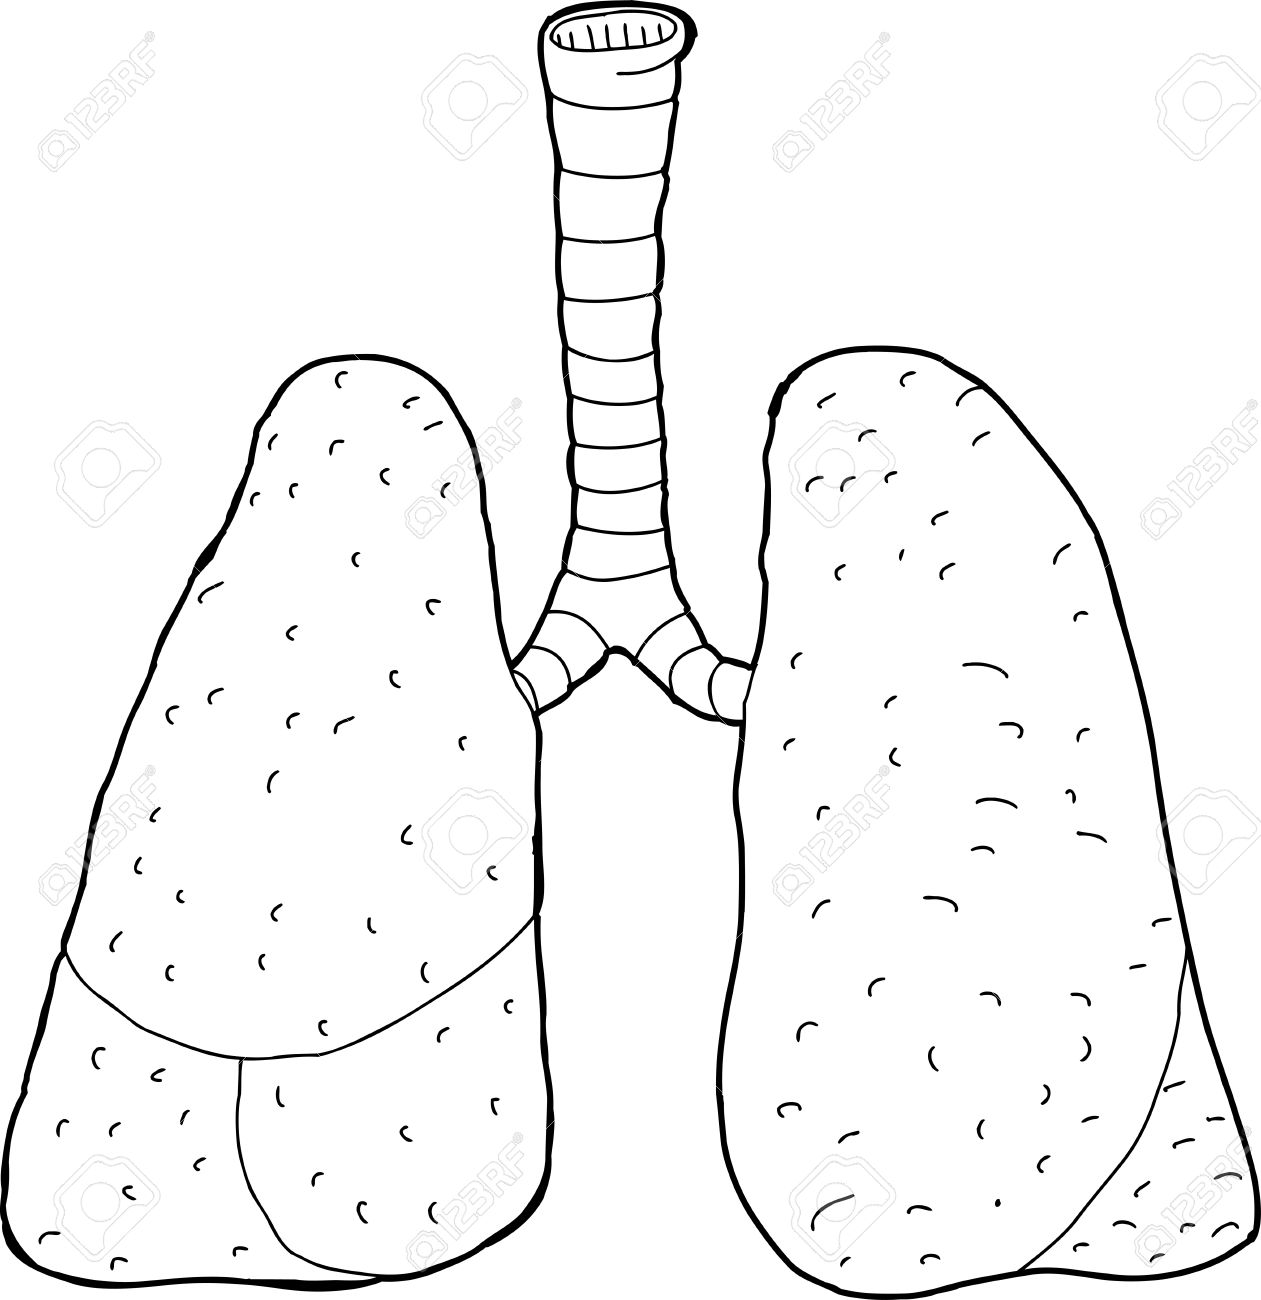 Hand Drawn Outline Of Human Lungs And Trachea Royalty Free.